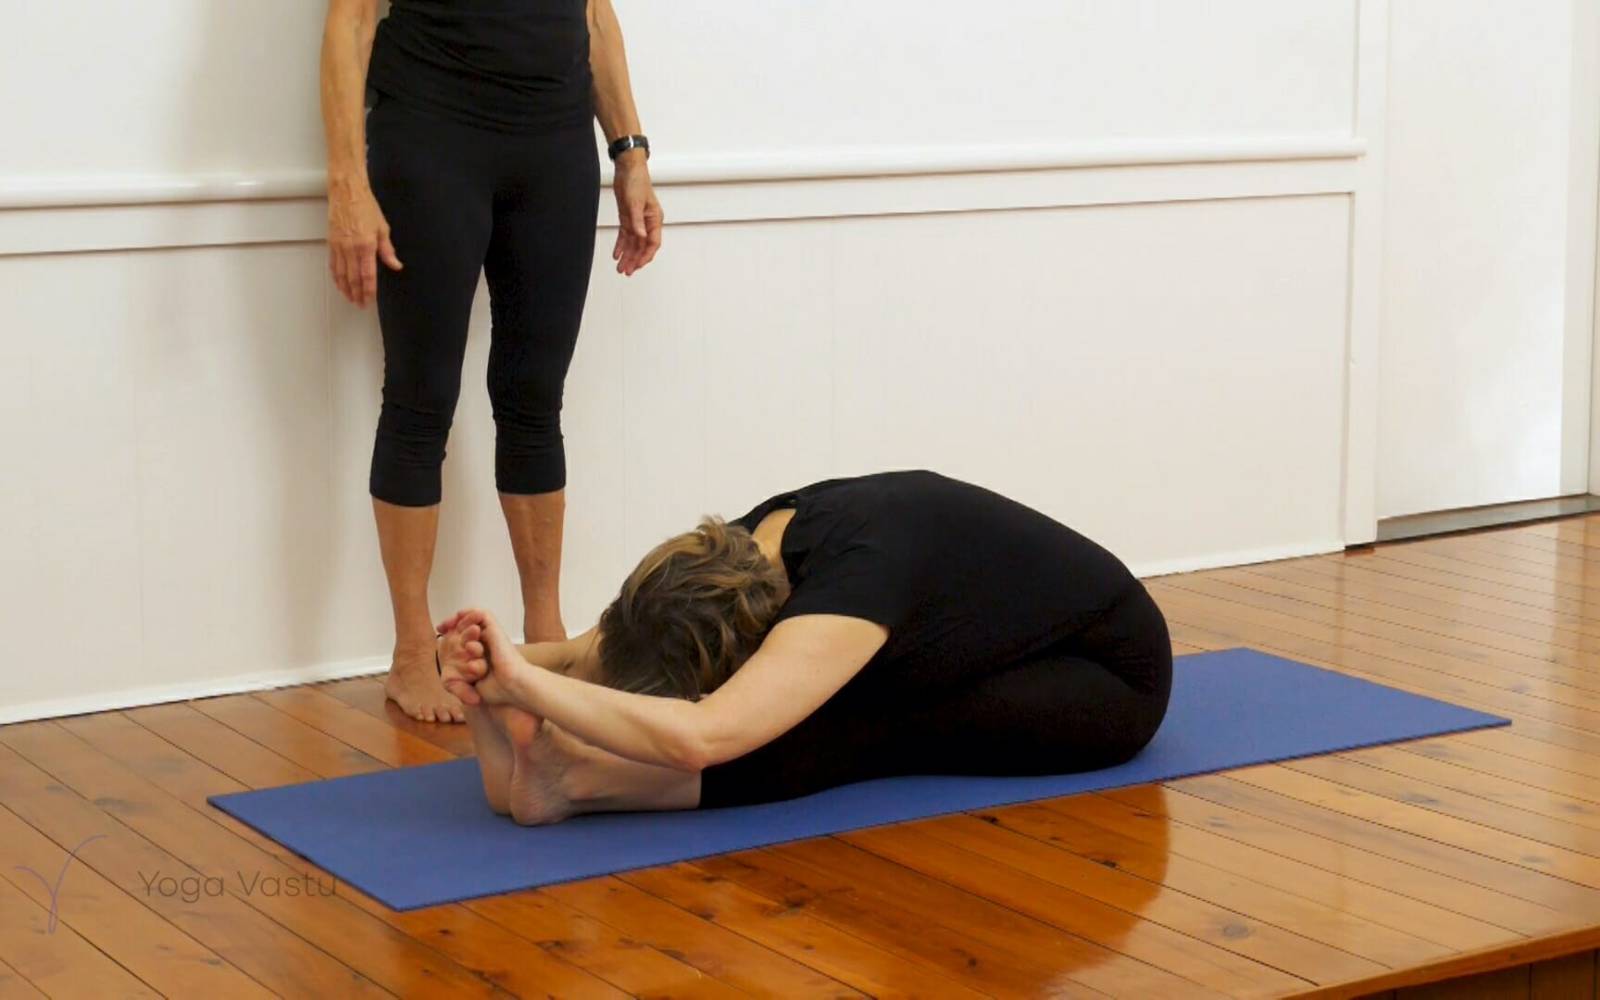 How to Modify Yoga Poses for Tight Hamstrings - DoYou